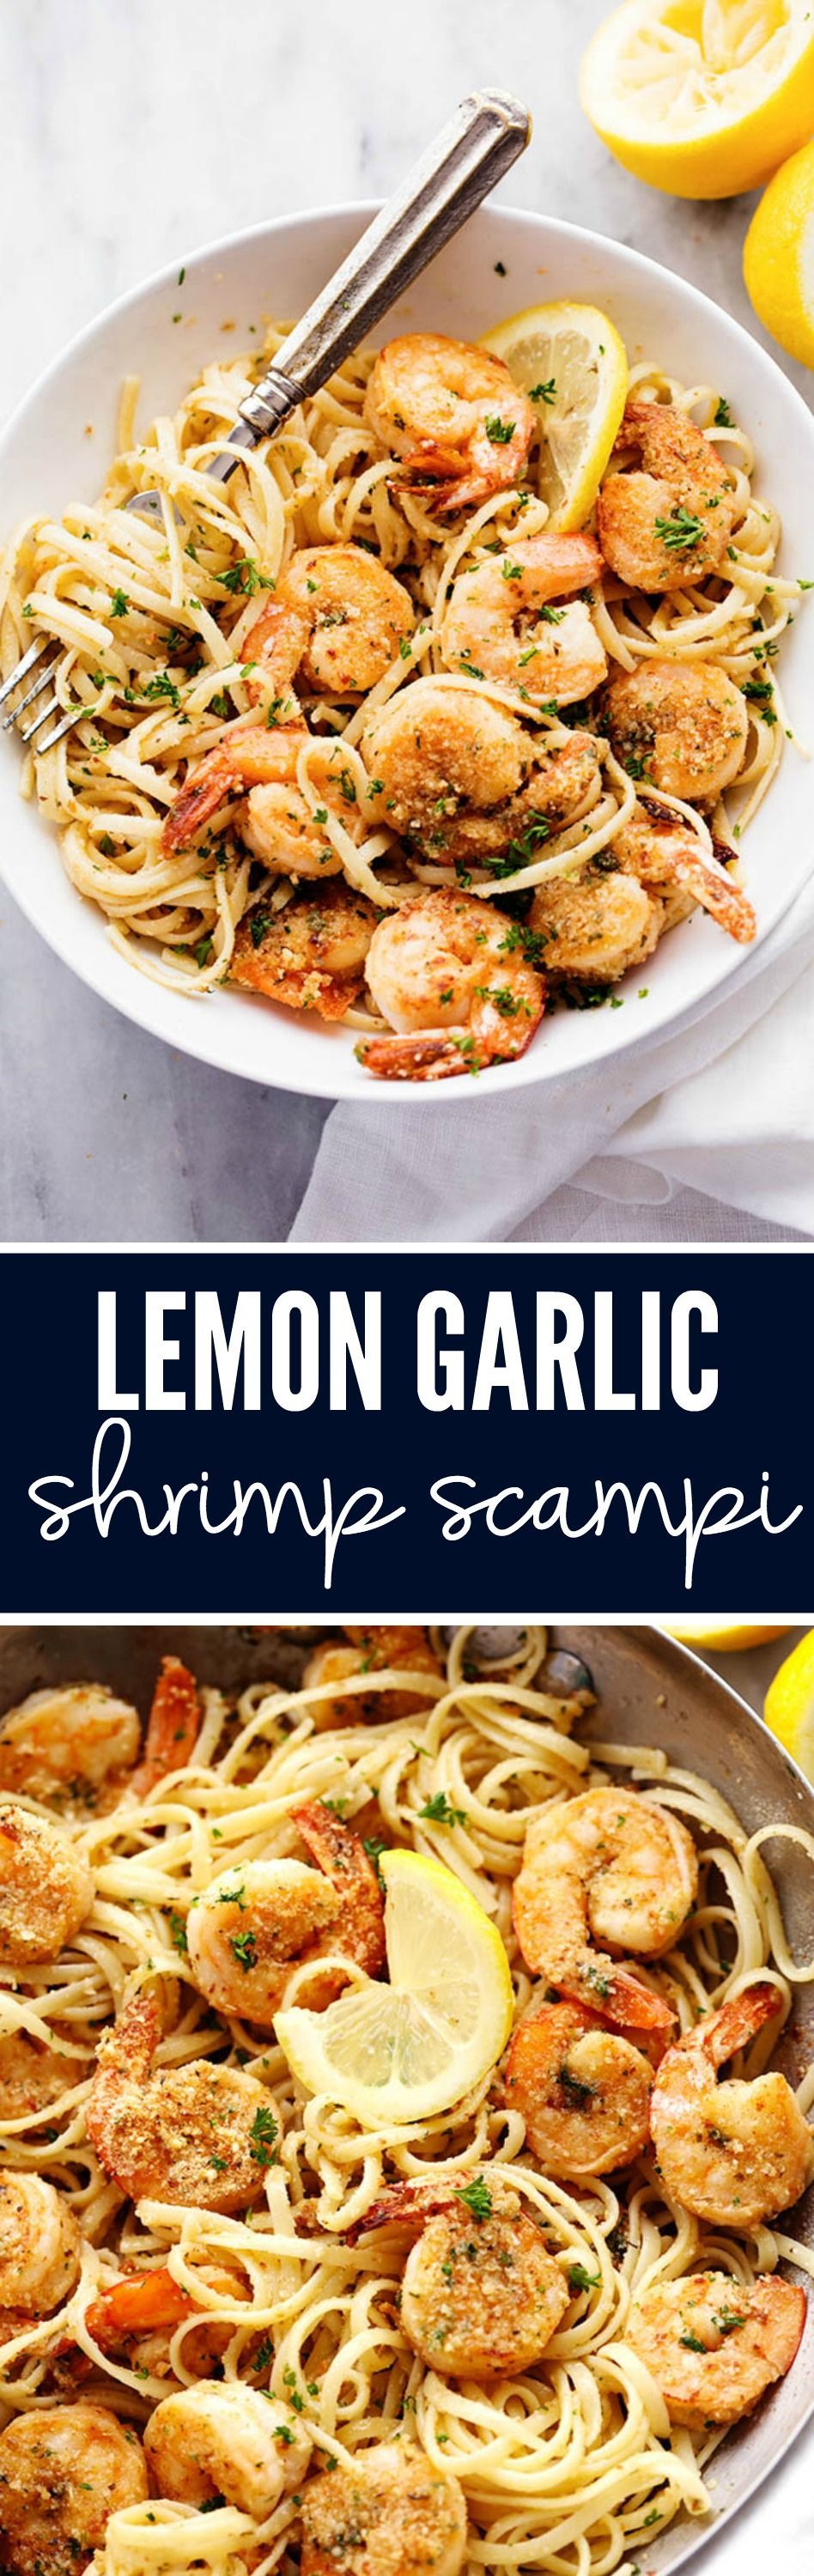 Lemon Garlic Shrimp Scampi is a delicious 30 minutes meal that cooks in a buttery lemon garlic sauce and breaded with a parmesan